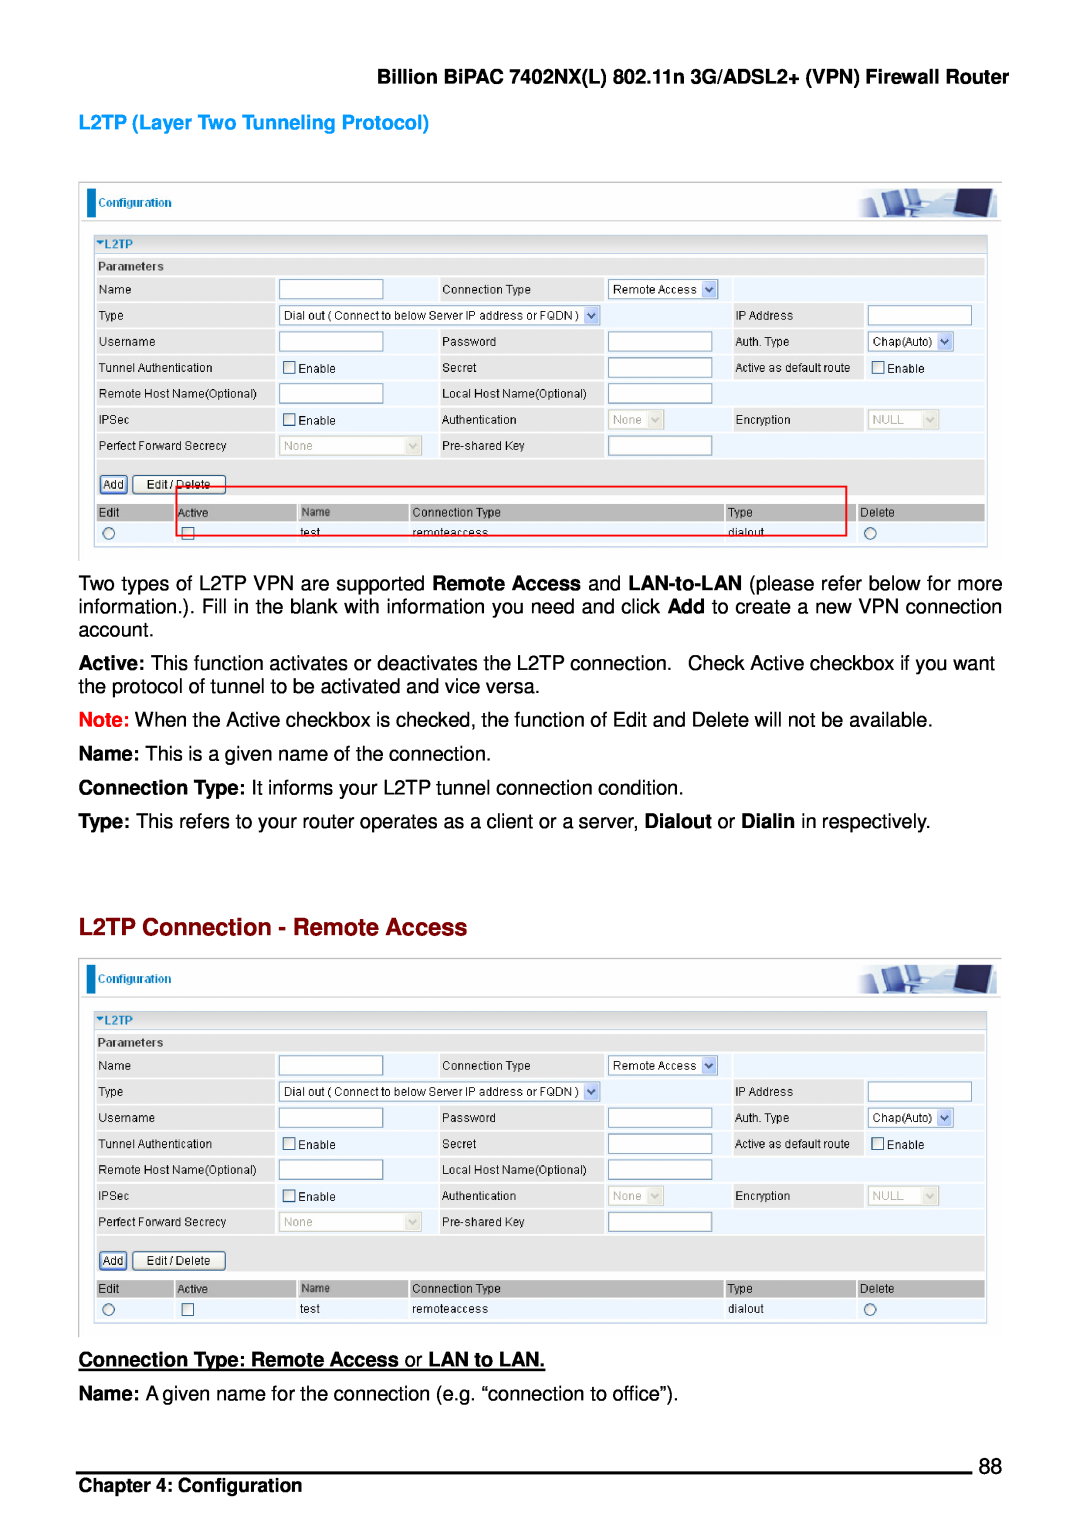 Billion Electric Company 7402NX user manual L2TP Connection - Remote Access, L2TP Layer Two Tunneling Protocol 